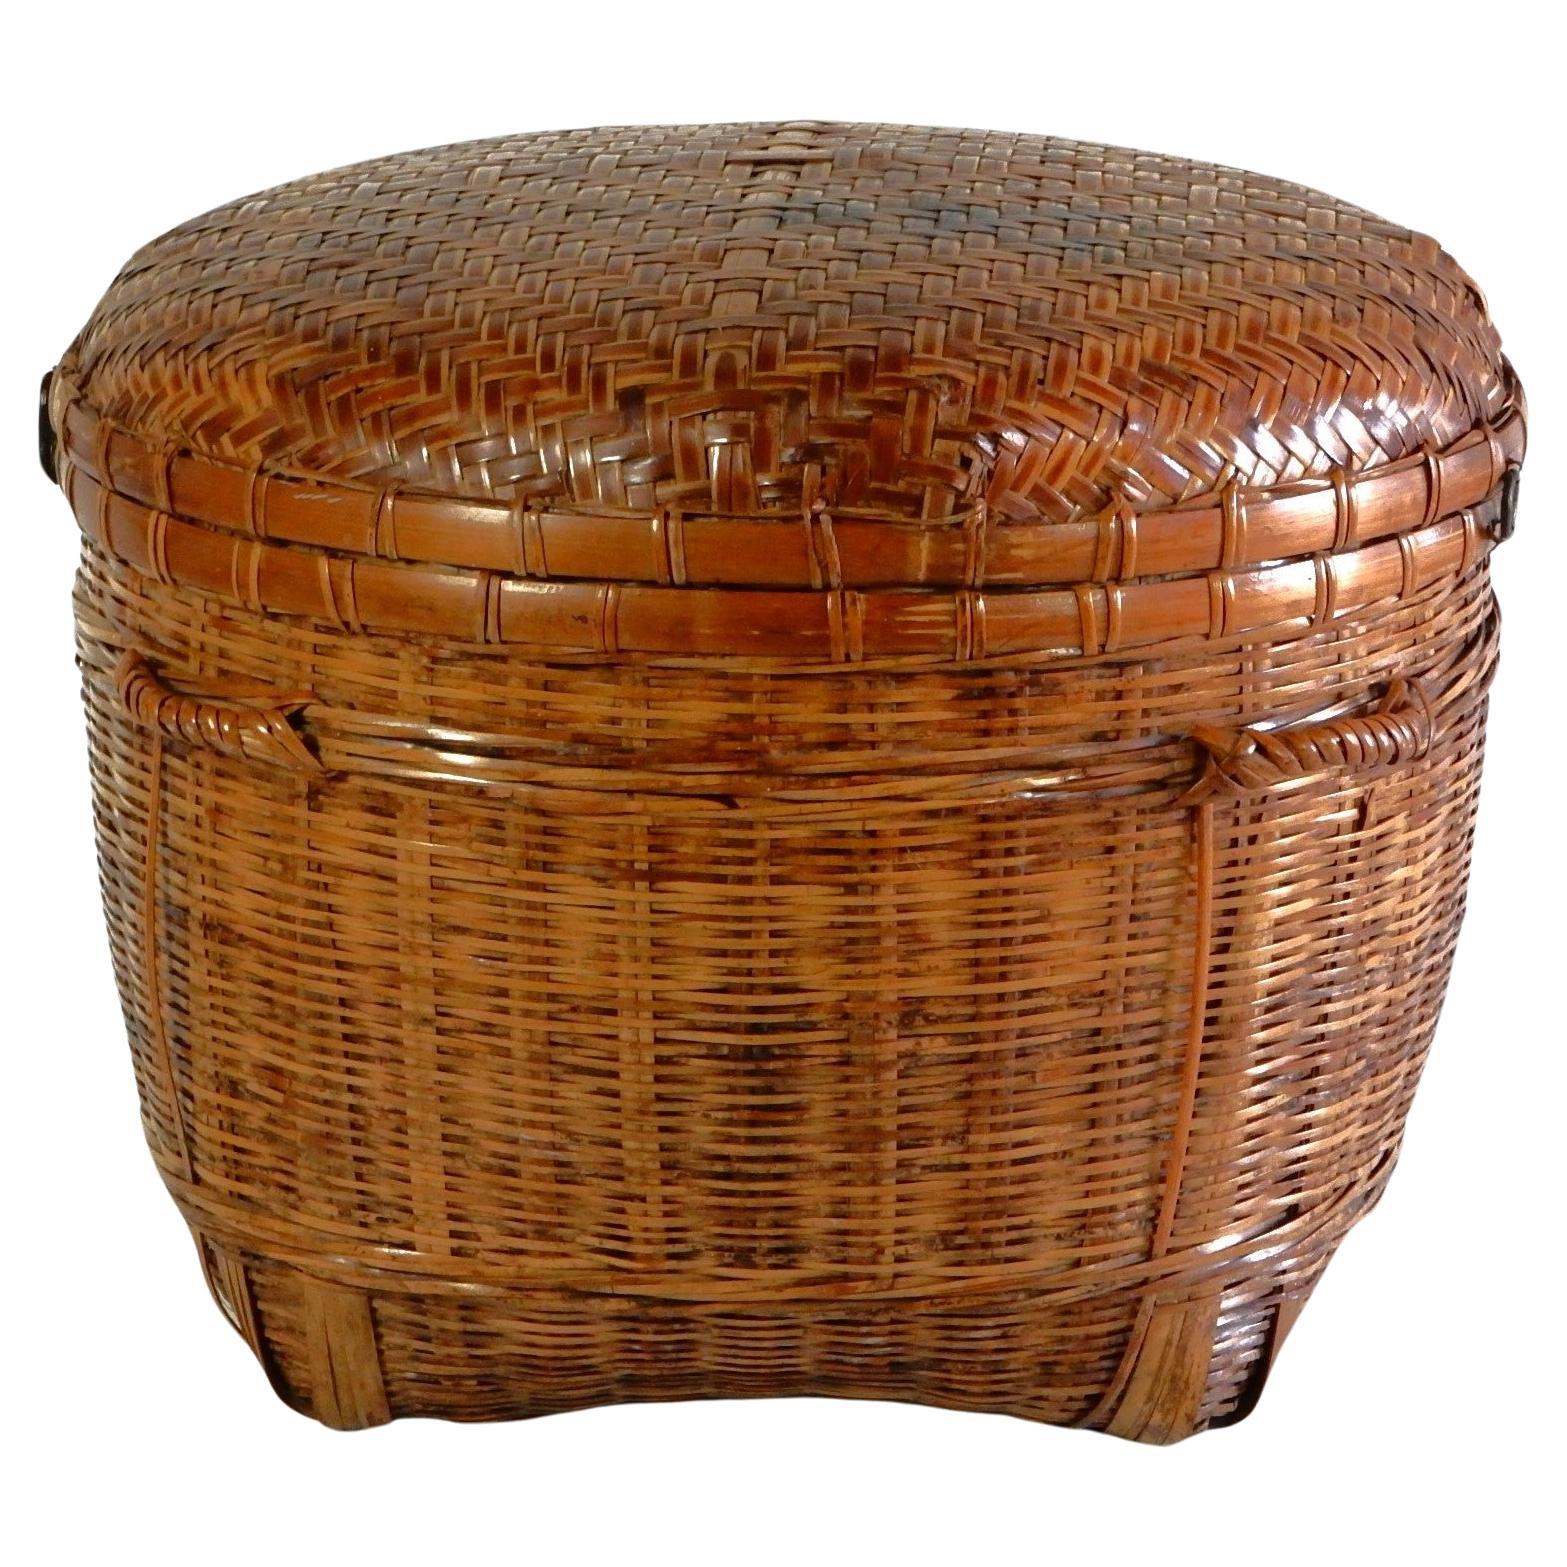 Large 19th C. Qing period Chinese Woven Bamboo & Cane Lidded Basket  For Sale